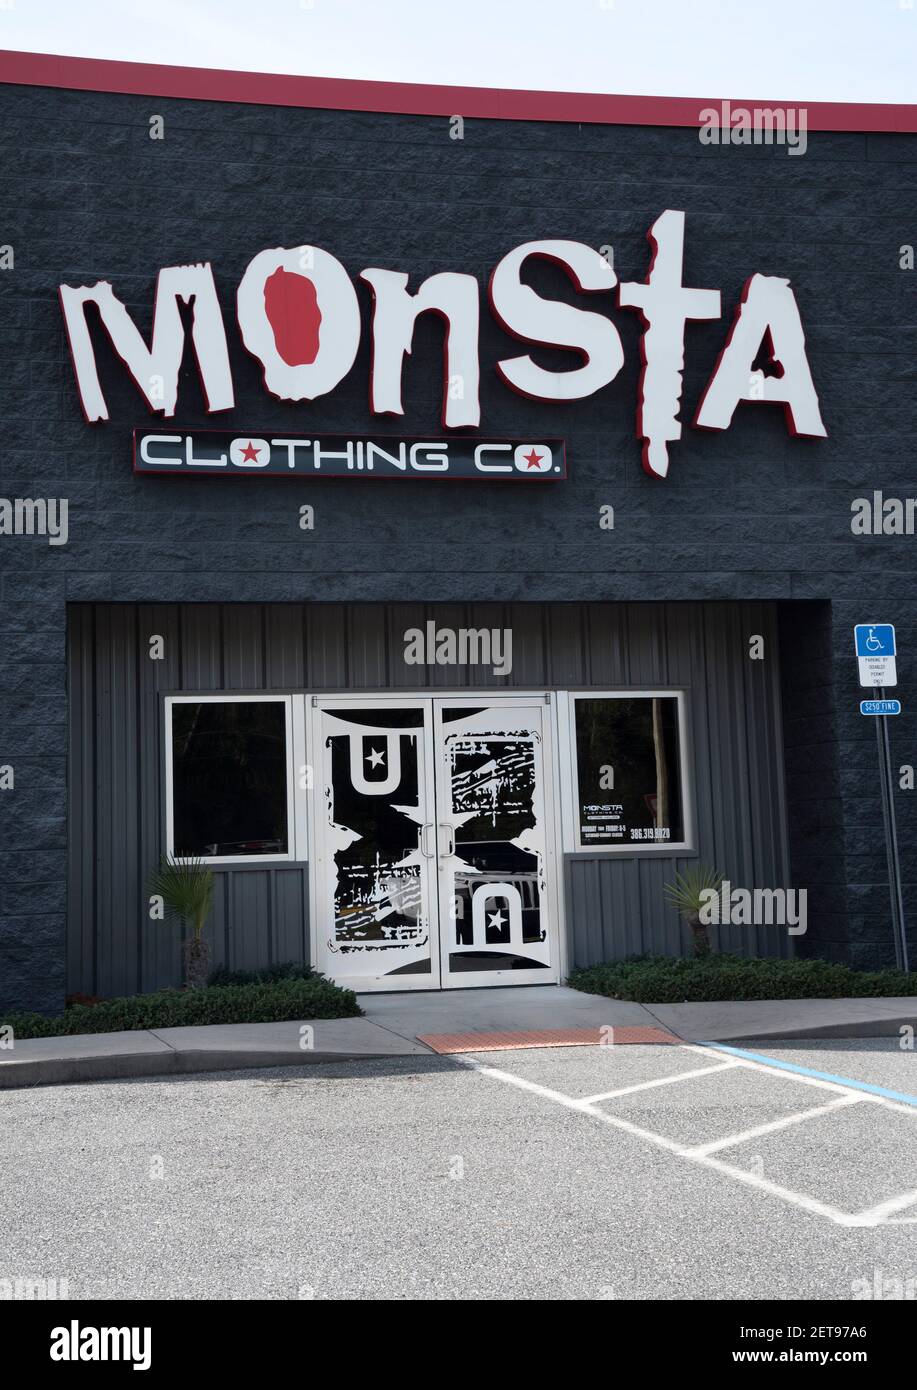 MONSTA Clothing Co. produces hard-core bodybuilding clothes, powerlifting gear, weightlifting shirts, (MMA) mixed martial arts fight wear ,for all. Stock Photo